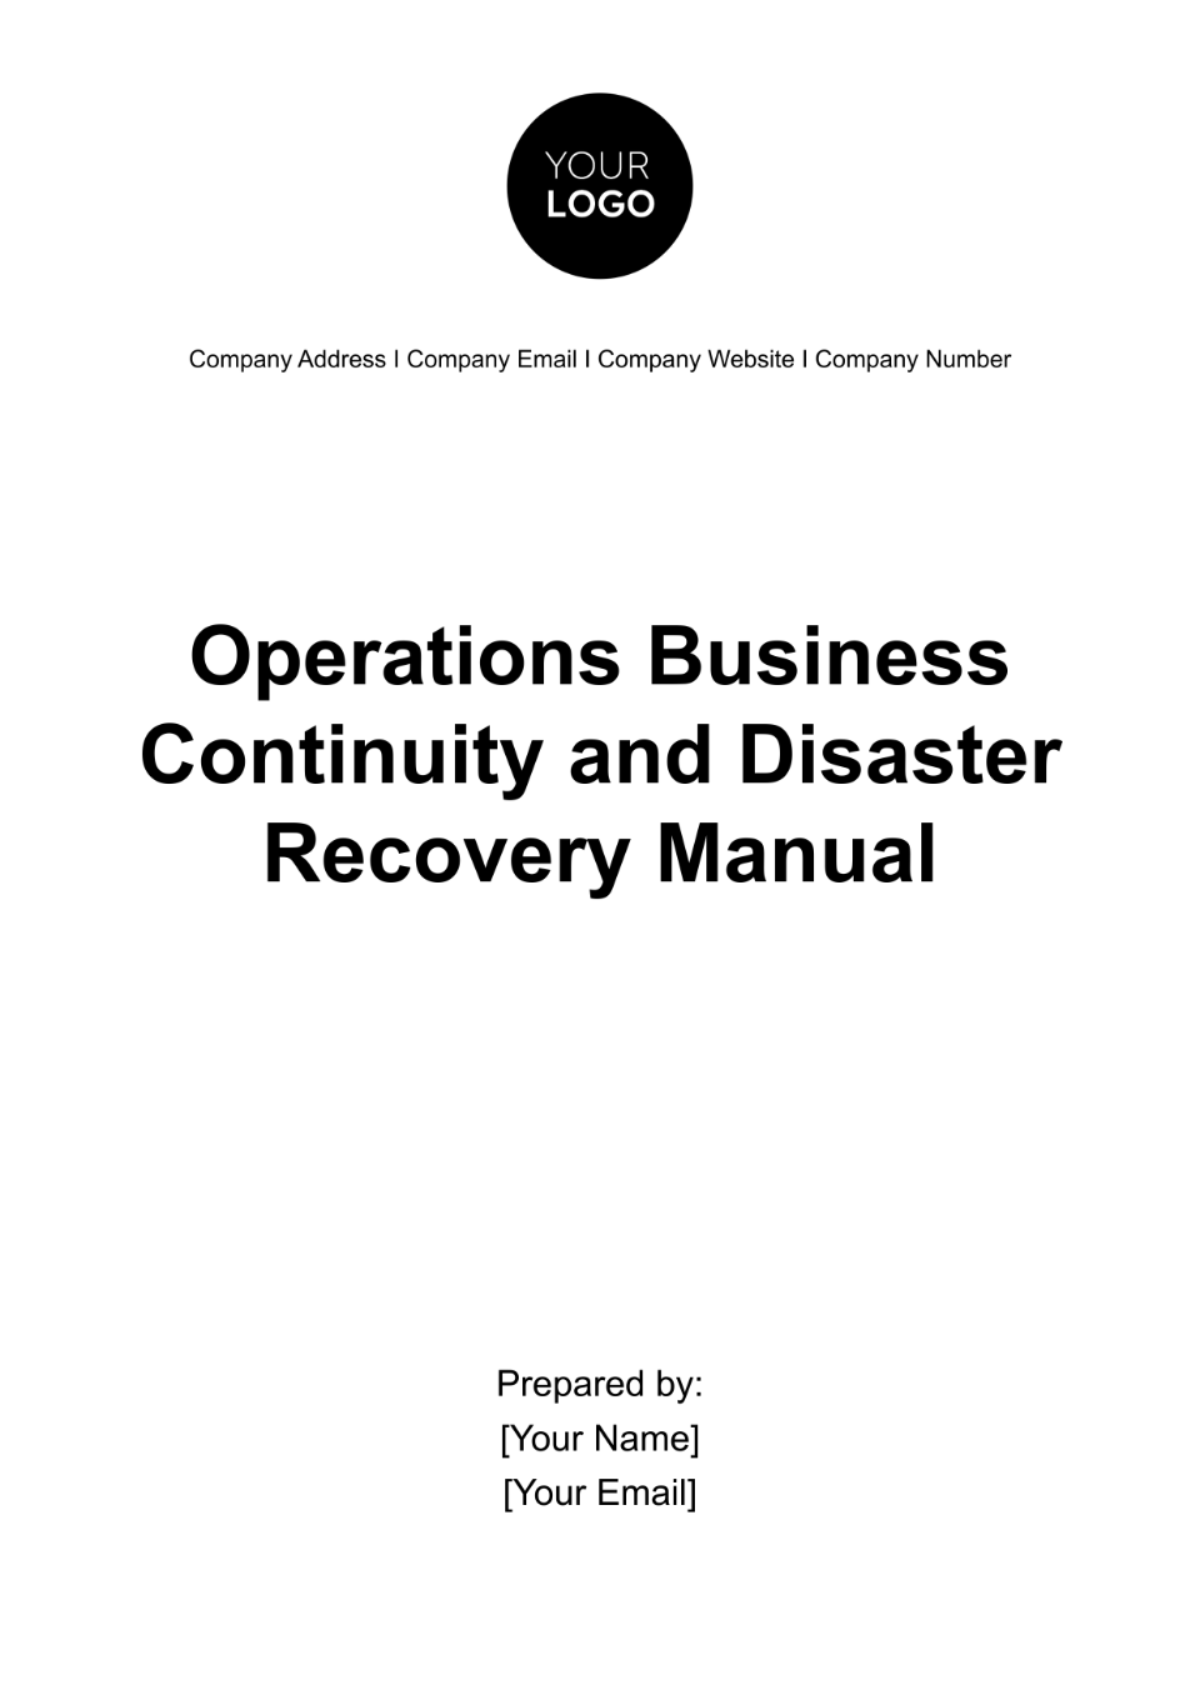 Operations Business Continuity and Disaster Recovery Manual Template